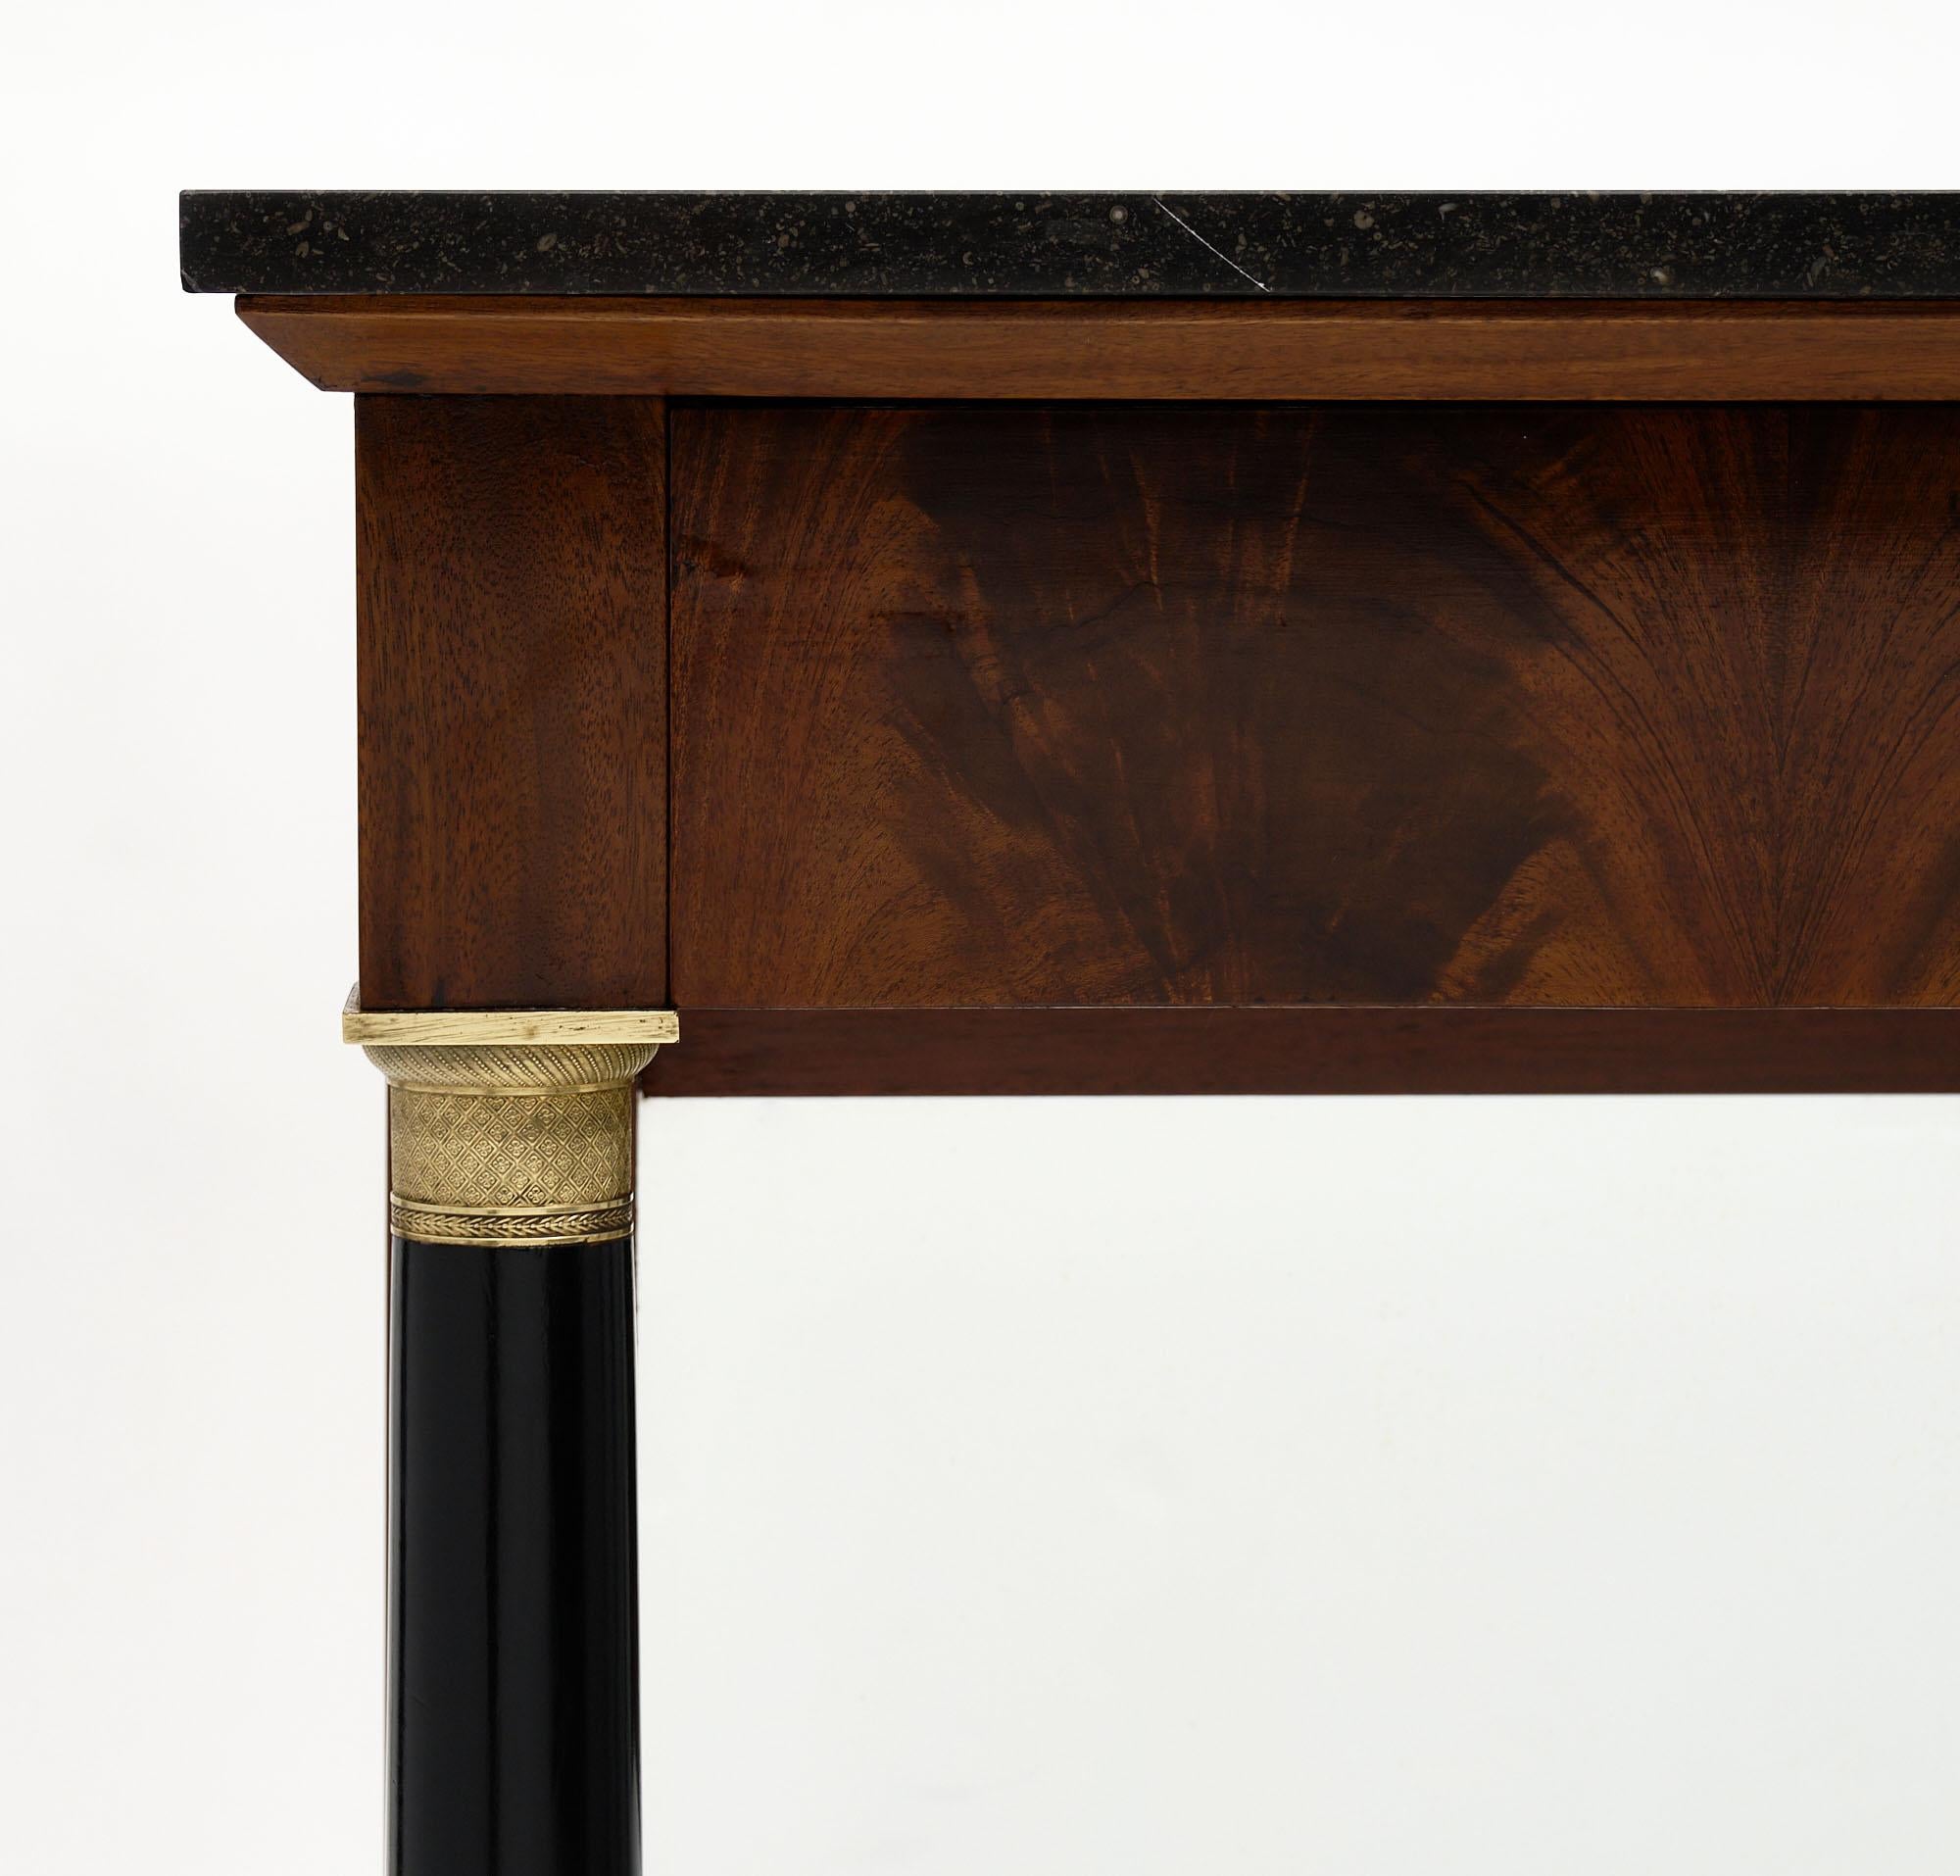 Mahogany French Antique Empire Console Table